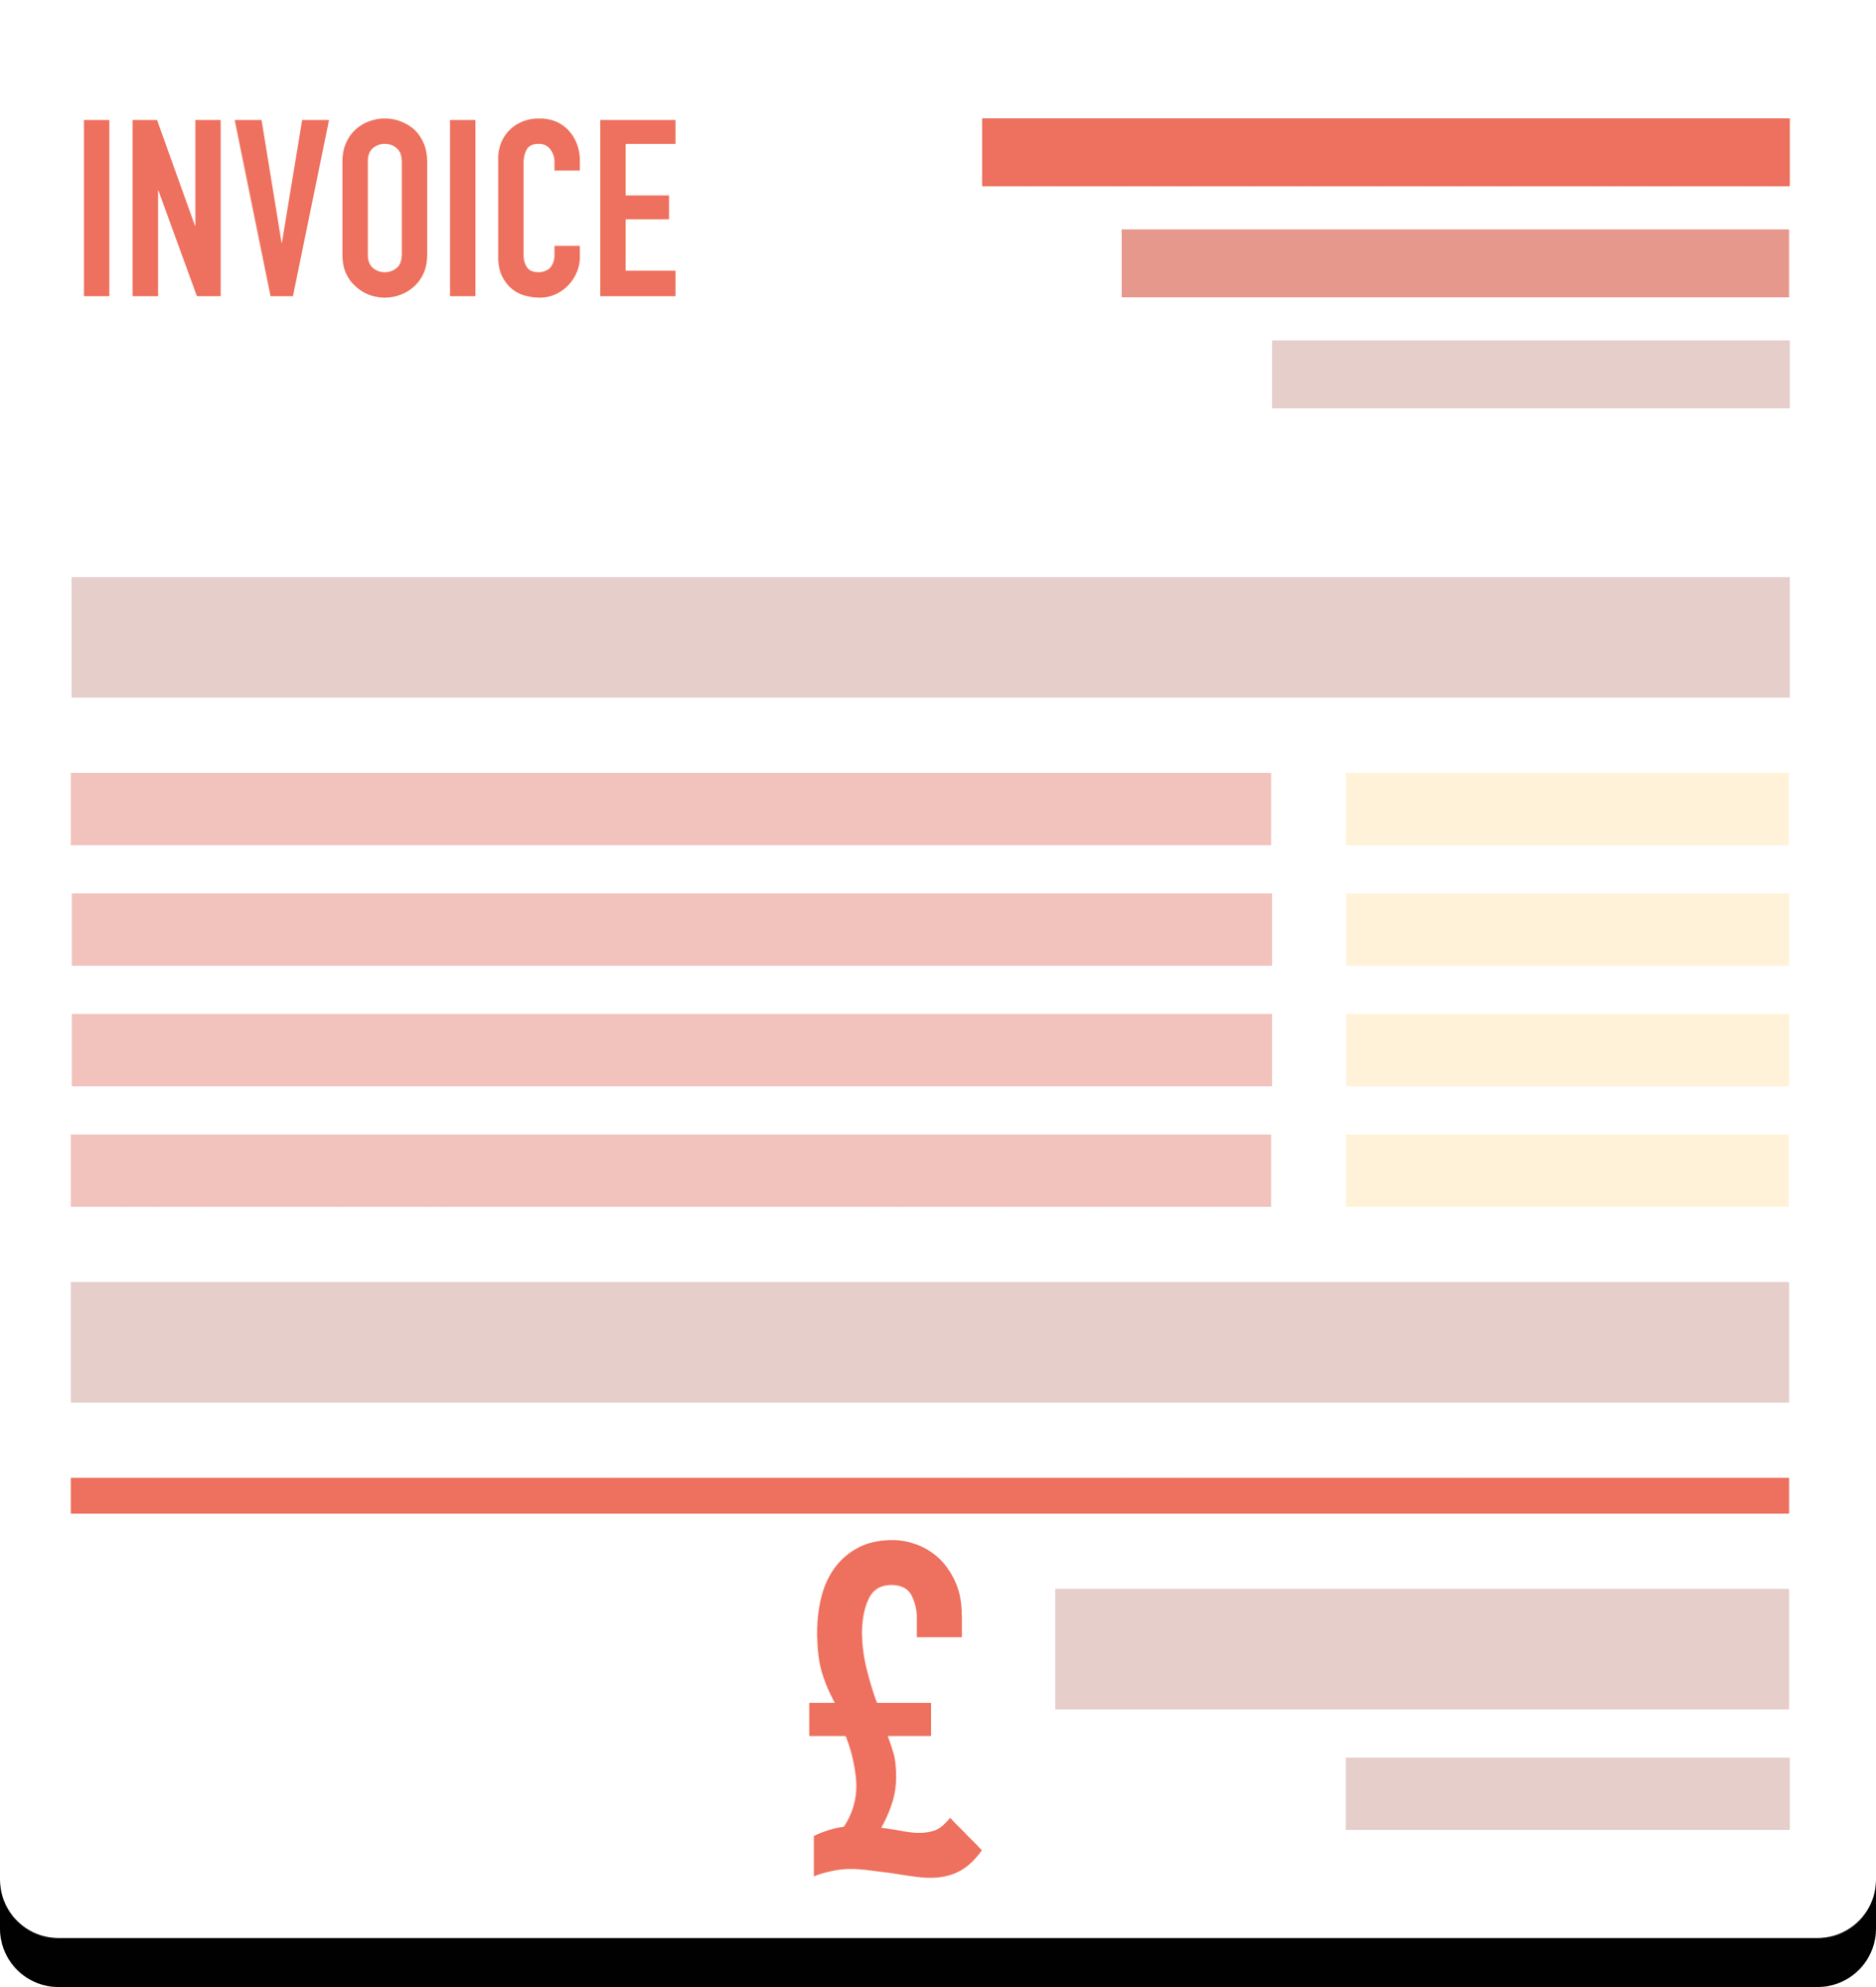 Invoice Template for Roofing Company